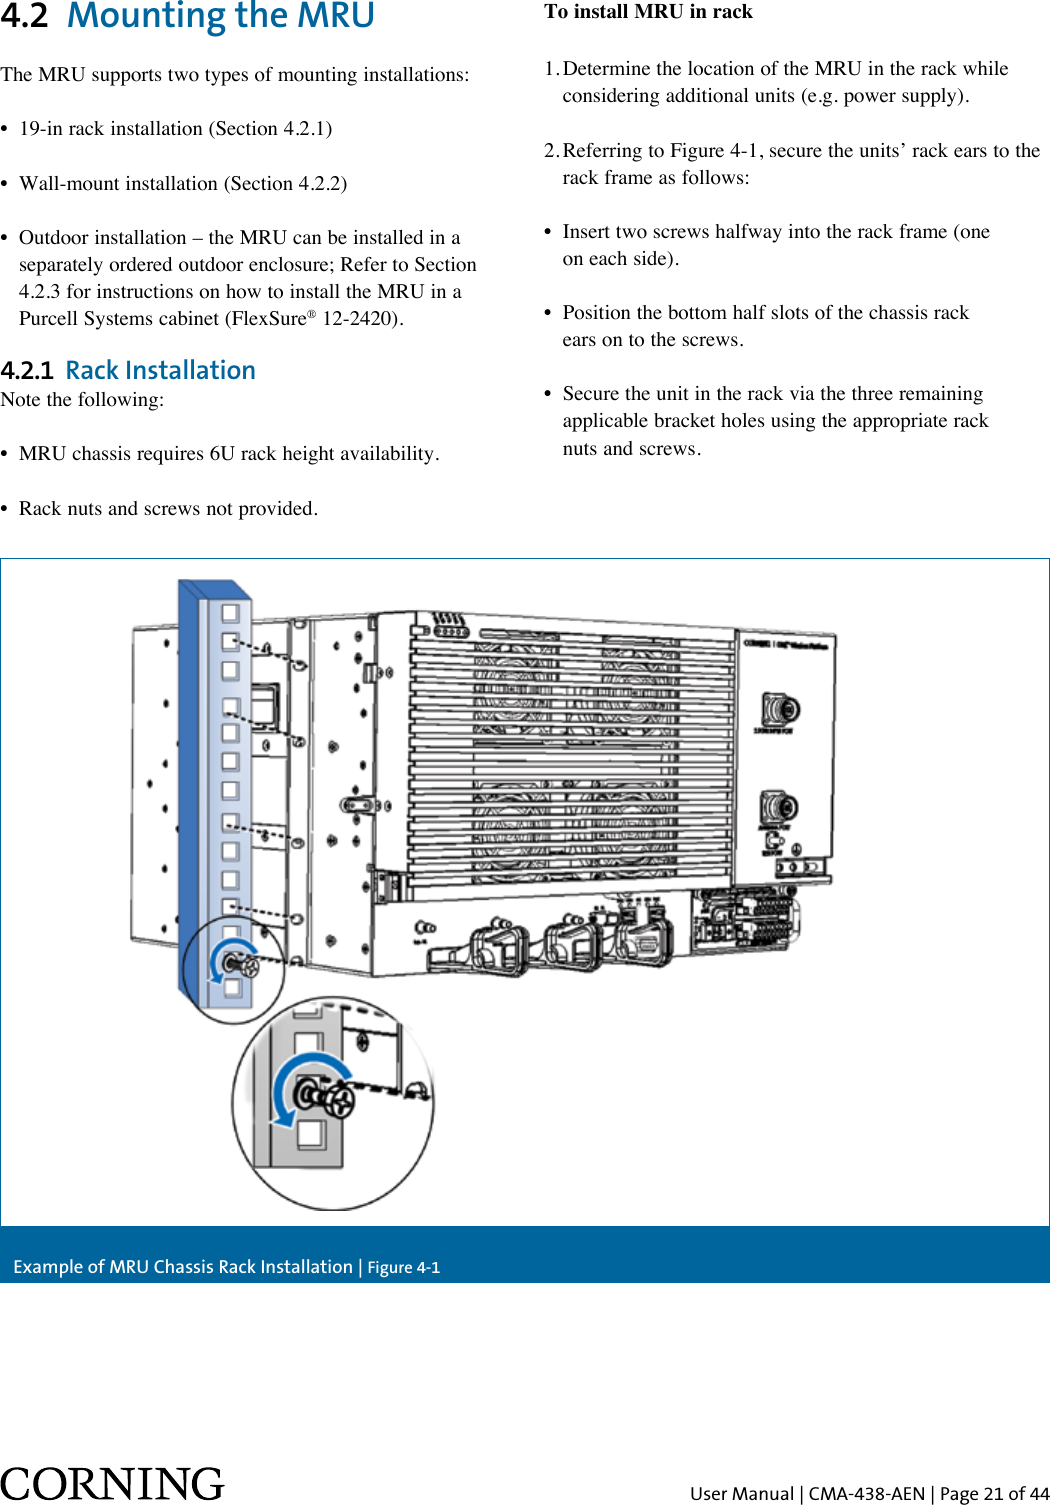 User Manual | CMA-438-AEN | Page 21 of 444.2  Mounting the MRUThe MRU supports two types of mounting installations:•  19-in rack installation (Section 4.2.1)•  Wall-mount installation (Section 4.2.2)•  Outdoor installation – the MRU can be installed in a    separately ordered outdoor enclosure; Refer to Section    4.2.3 for instructions on how to install the MRU in a    Purcell Systems cabinet (FlexSure® 12-2420).4.2.1  Rack InstallationNote the following:•  MRU chassis requires 6U rack height availability.•  Rack nuts and screws not provided.To install MRU in rack1. Determine the location of the MRU in the rack while    considering additional units (e.g. power supply).2. Referring to Figure 4-1, secure the units’ rack ears to the    rack frame as follows:•   Insert two screws halfway into the rack frame (one on each side).•   Position the bottom half slots of the chassis rack  ears on to the screws.•   Secure the unit in the rack via the three remaining  applicable bracket holes using the appropriate rack  nuts and screws.Example of MRU Chassis Rack Installation | Figure 4-1